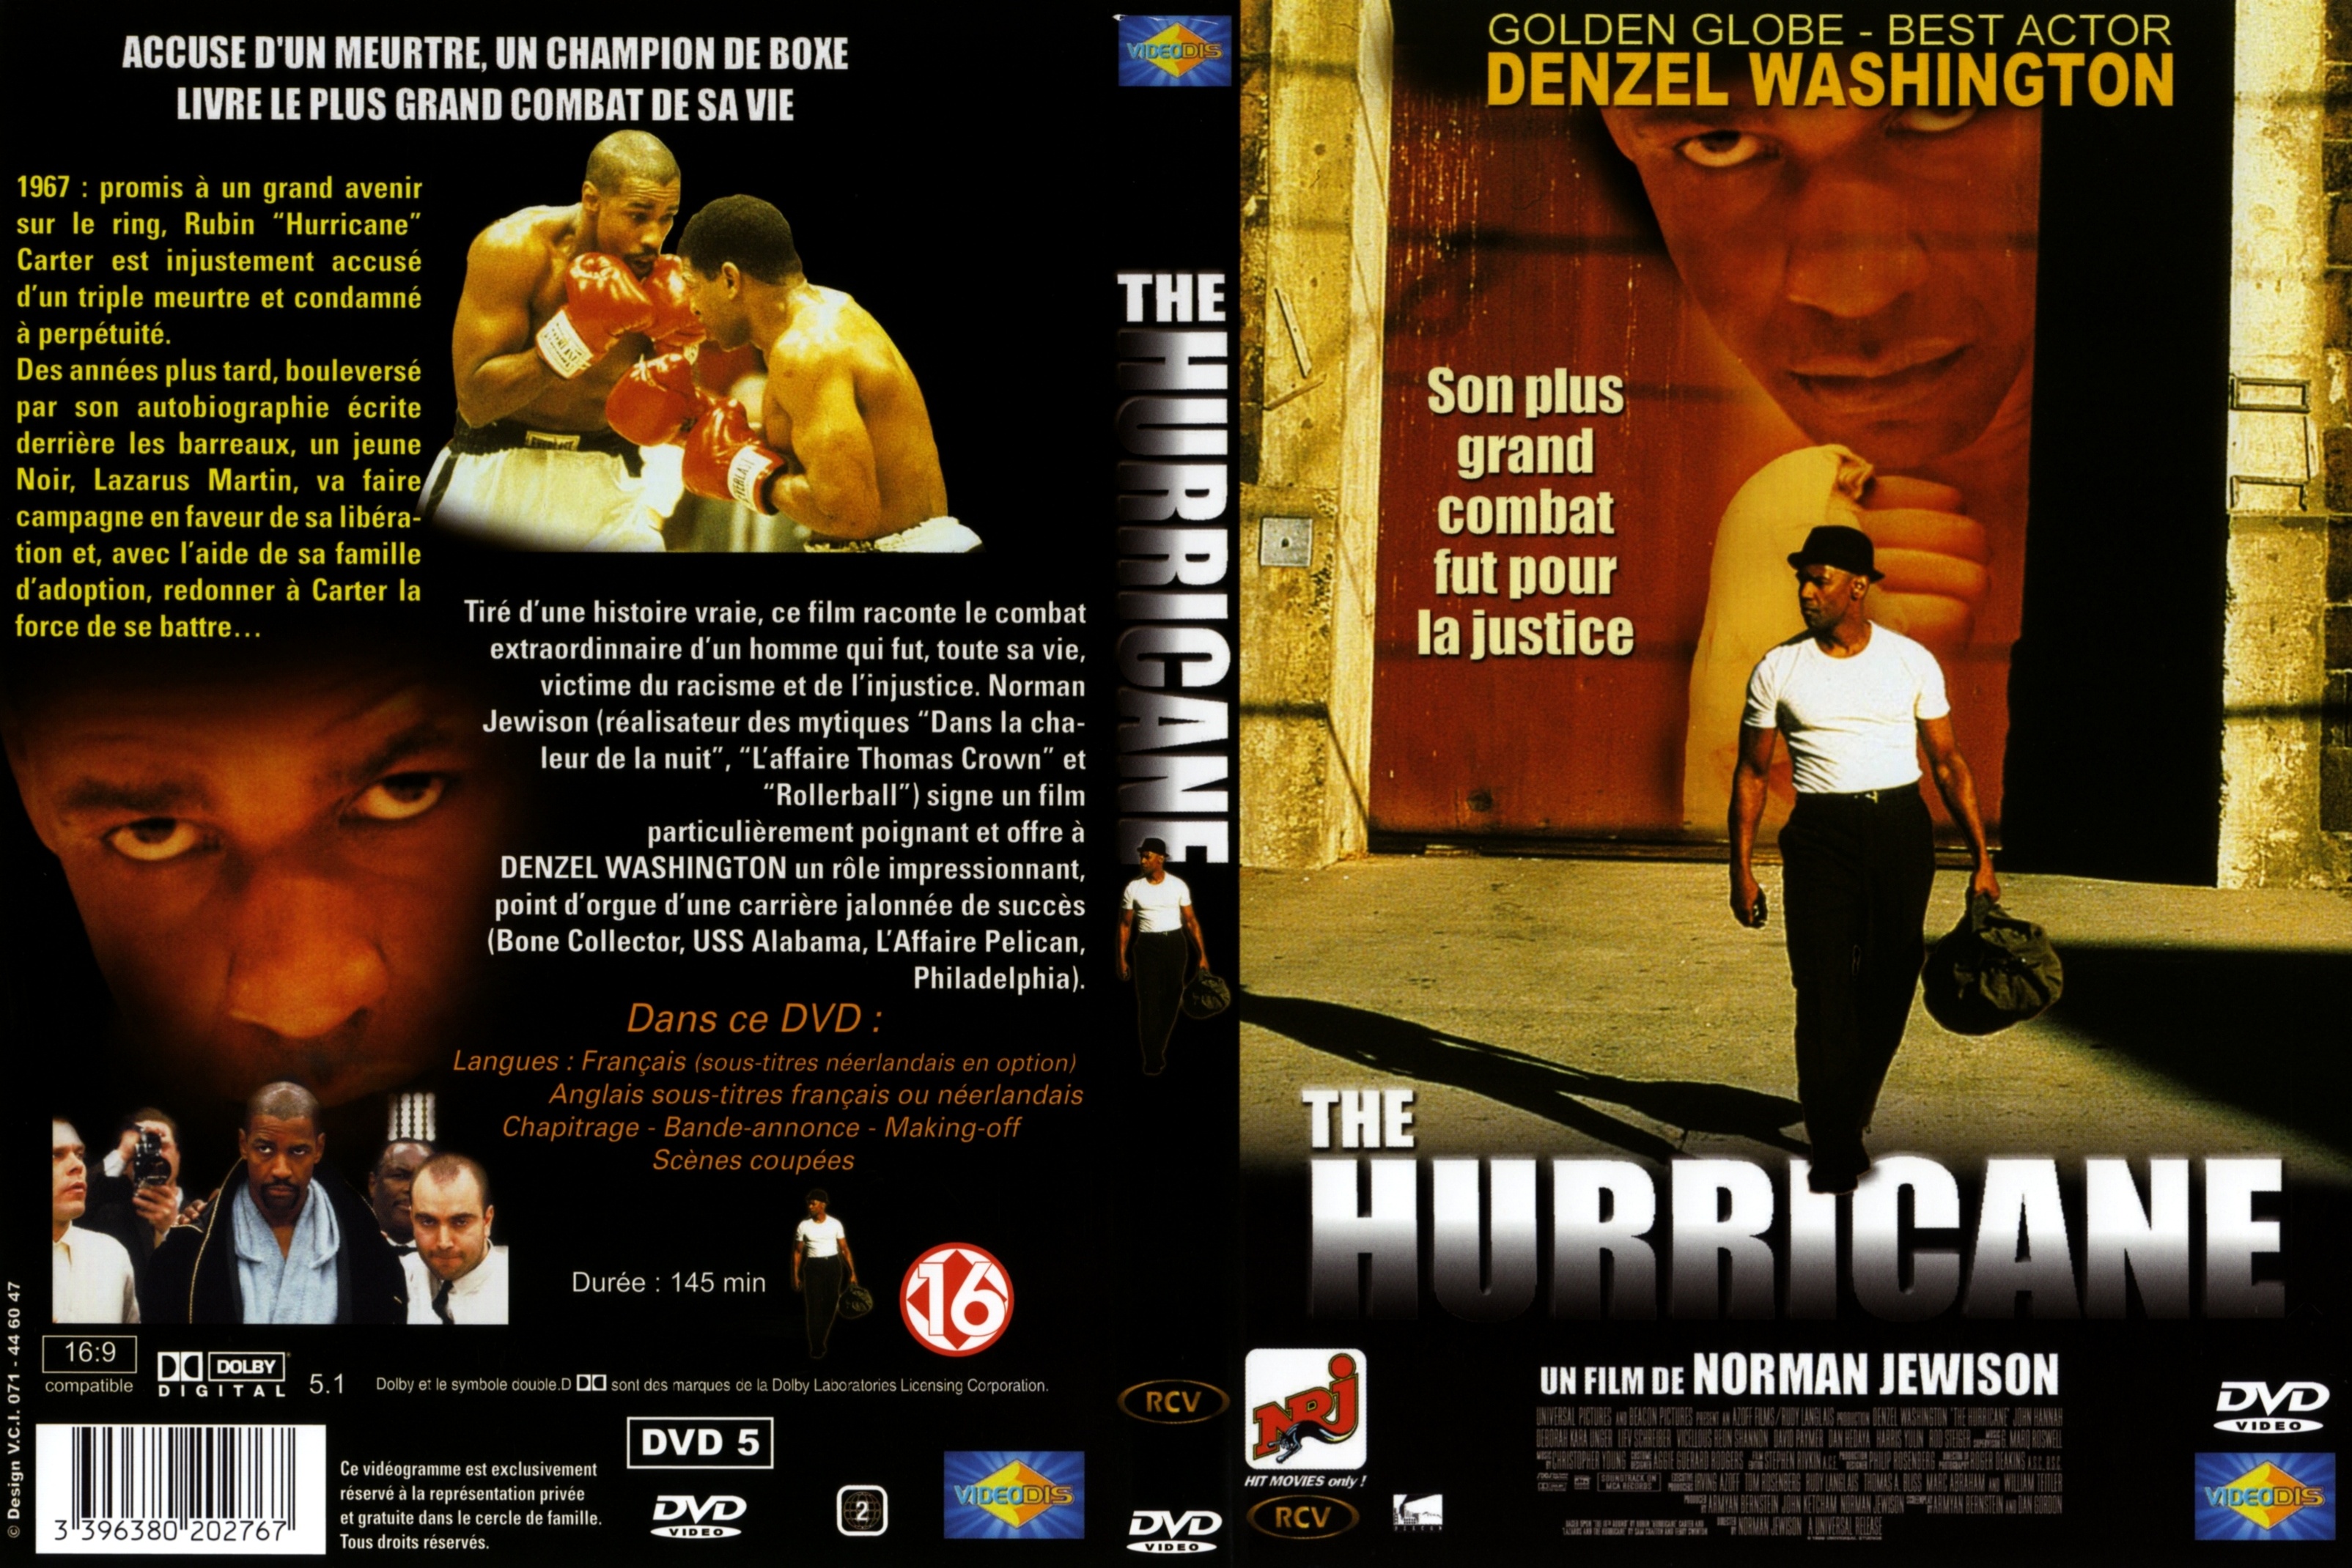 Jaquette DVD The hurricane